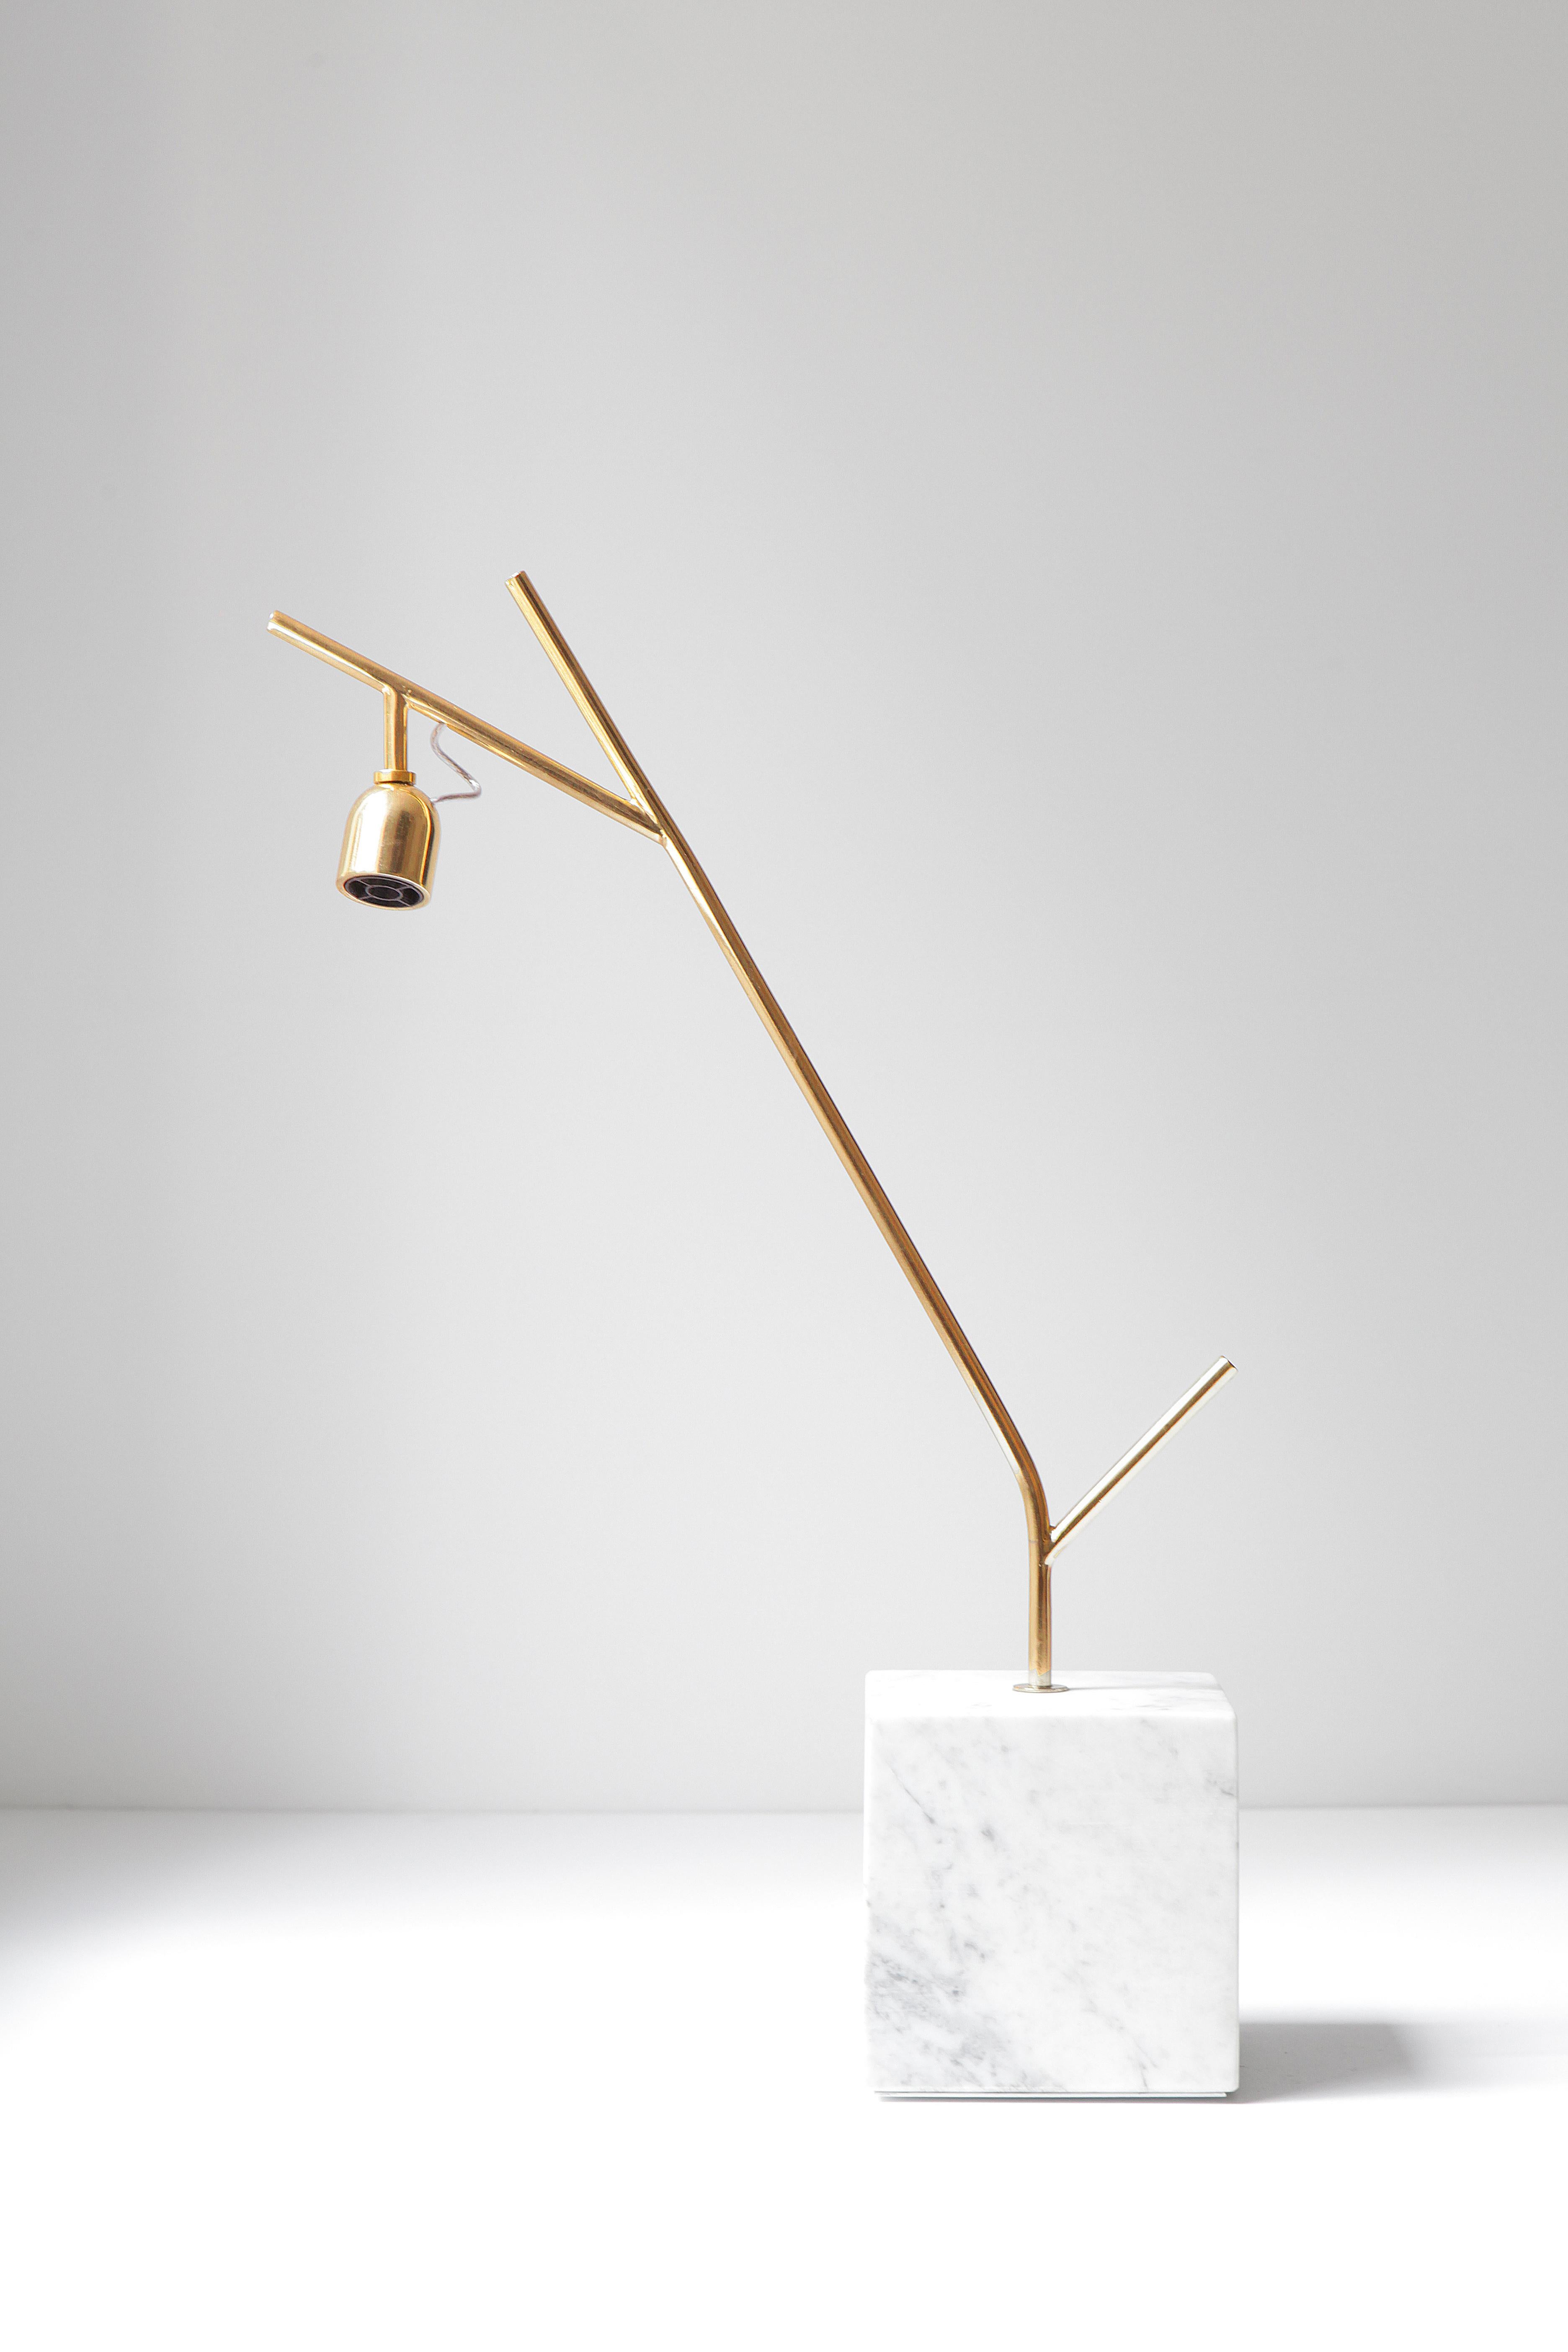 Each Branche table lamp is handmade, therefore the piece comes with some millimetric difference.
One piece is never similar to the next, because the pieces are made individually by the artist and not by a machine giving them a touch of